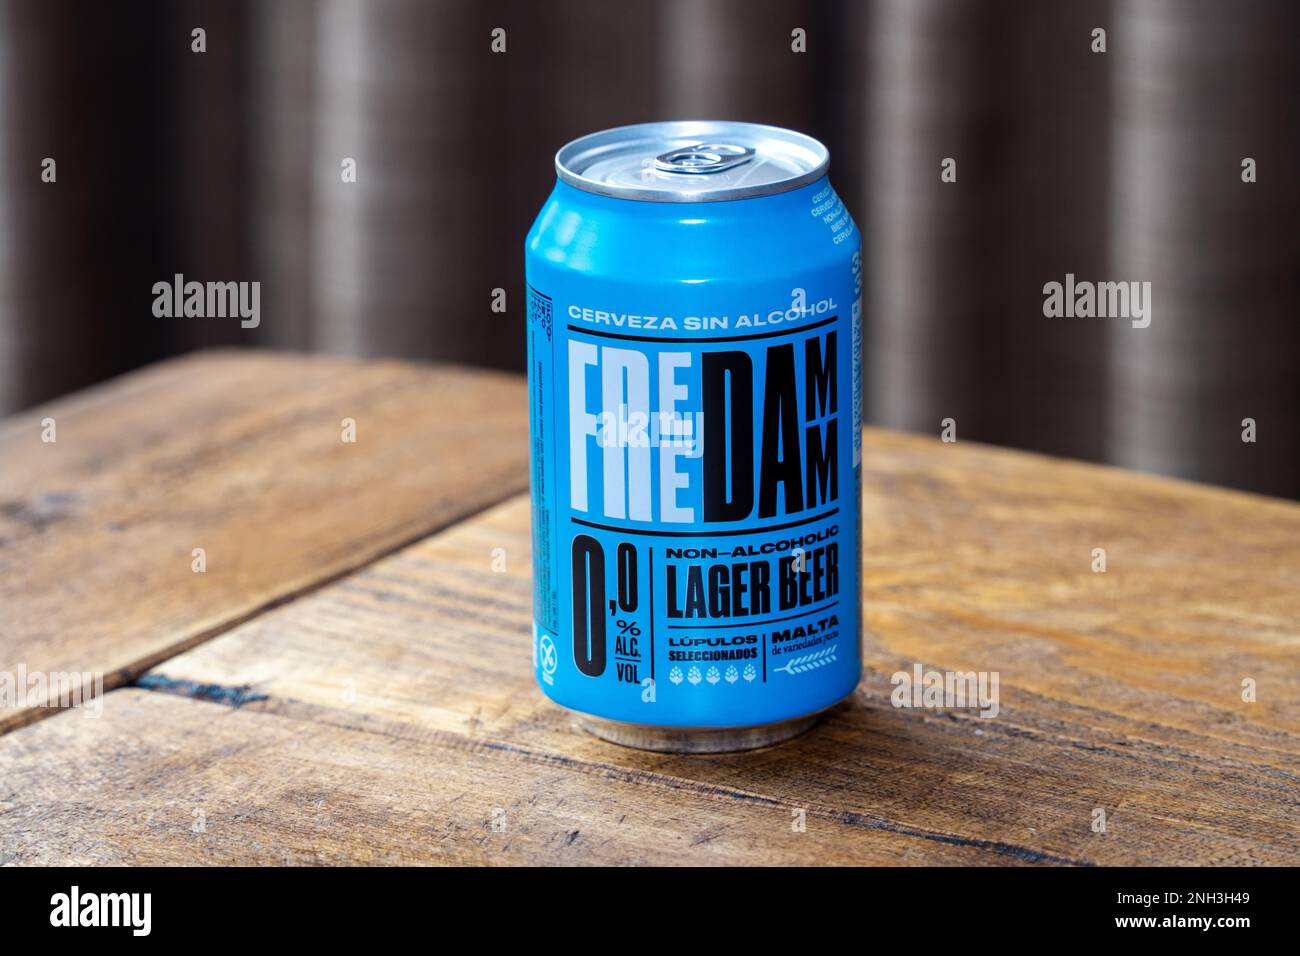 An unopened can of Freedamm alcohol-free lager beer on a table. Stock Photo